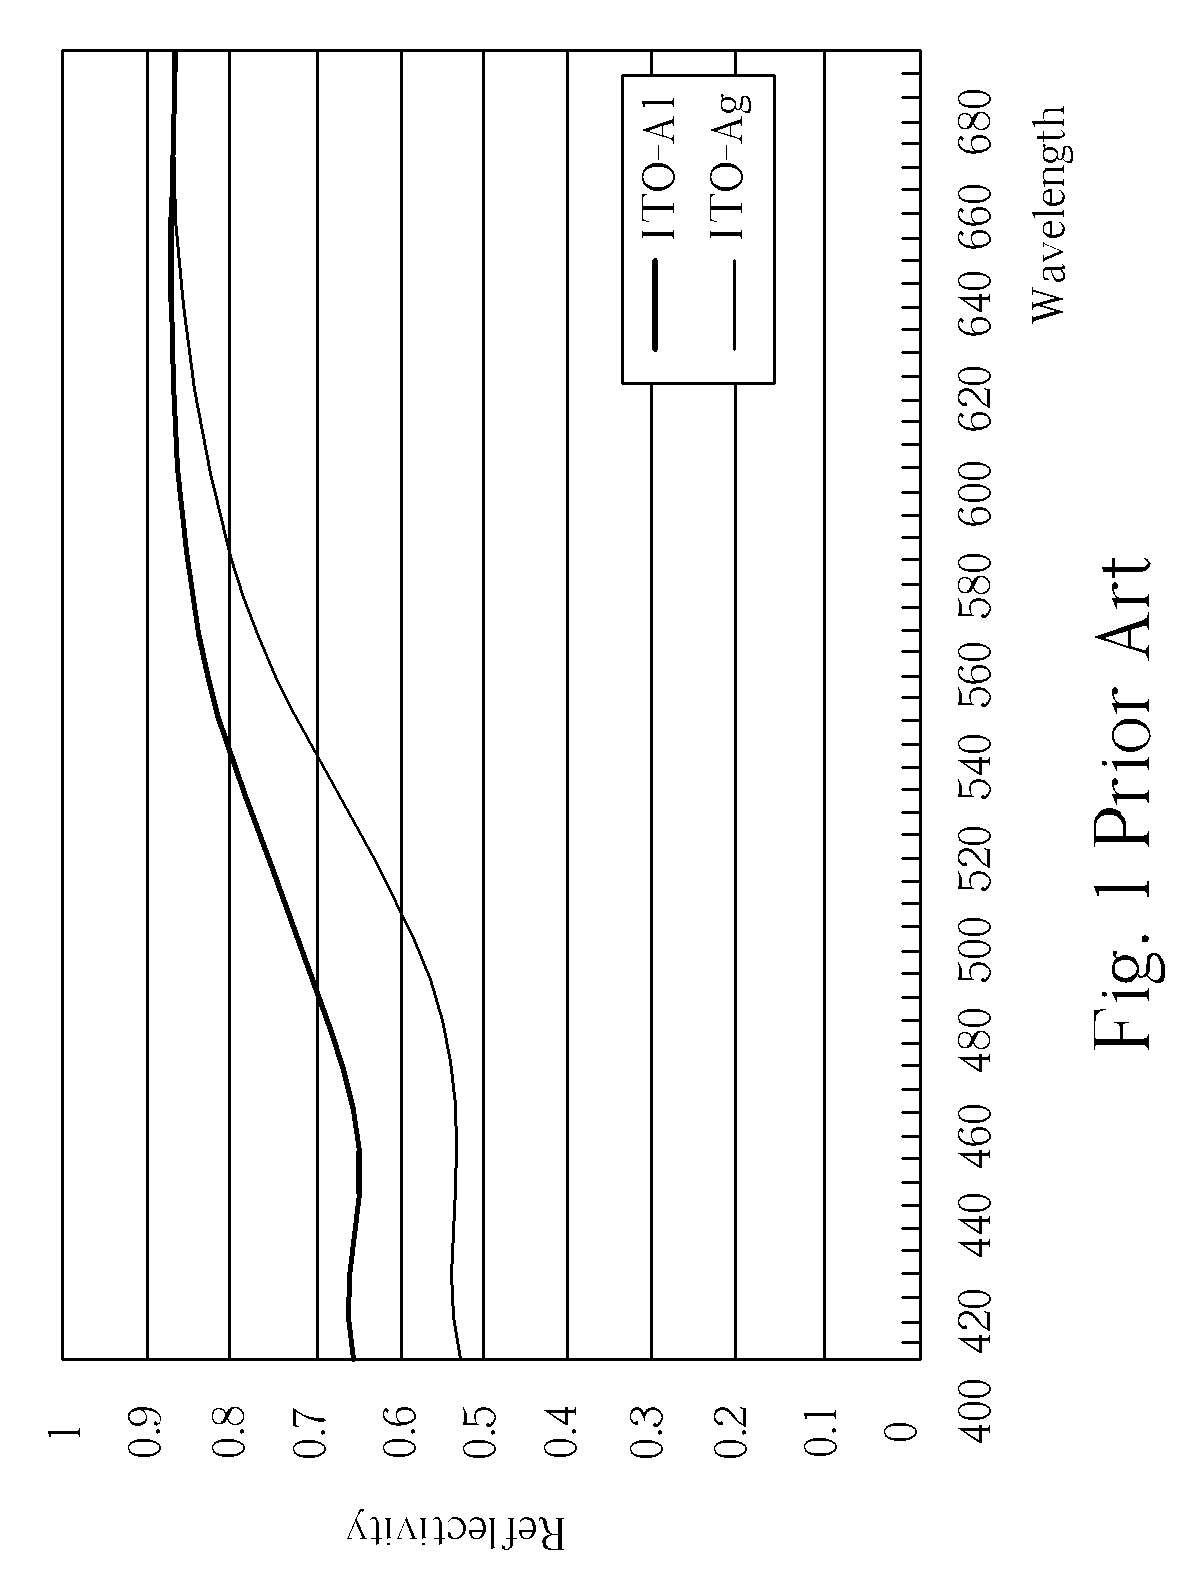 Light emitting diode having an omnidirectional reflector including a transparent conductive layer